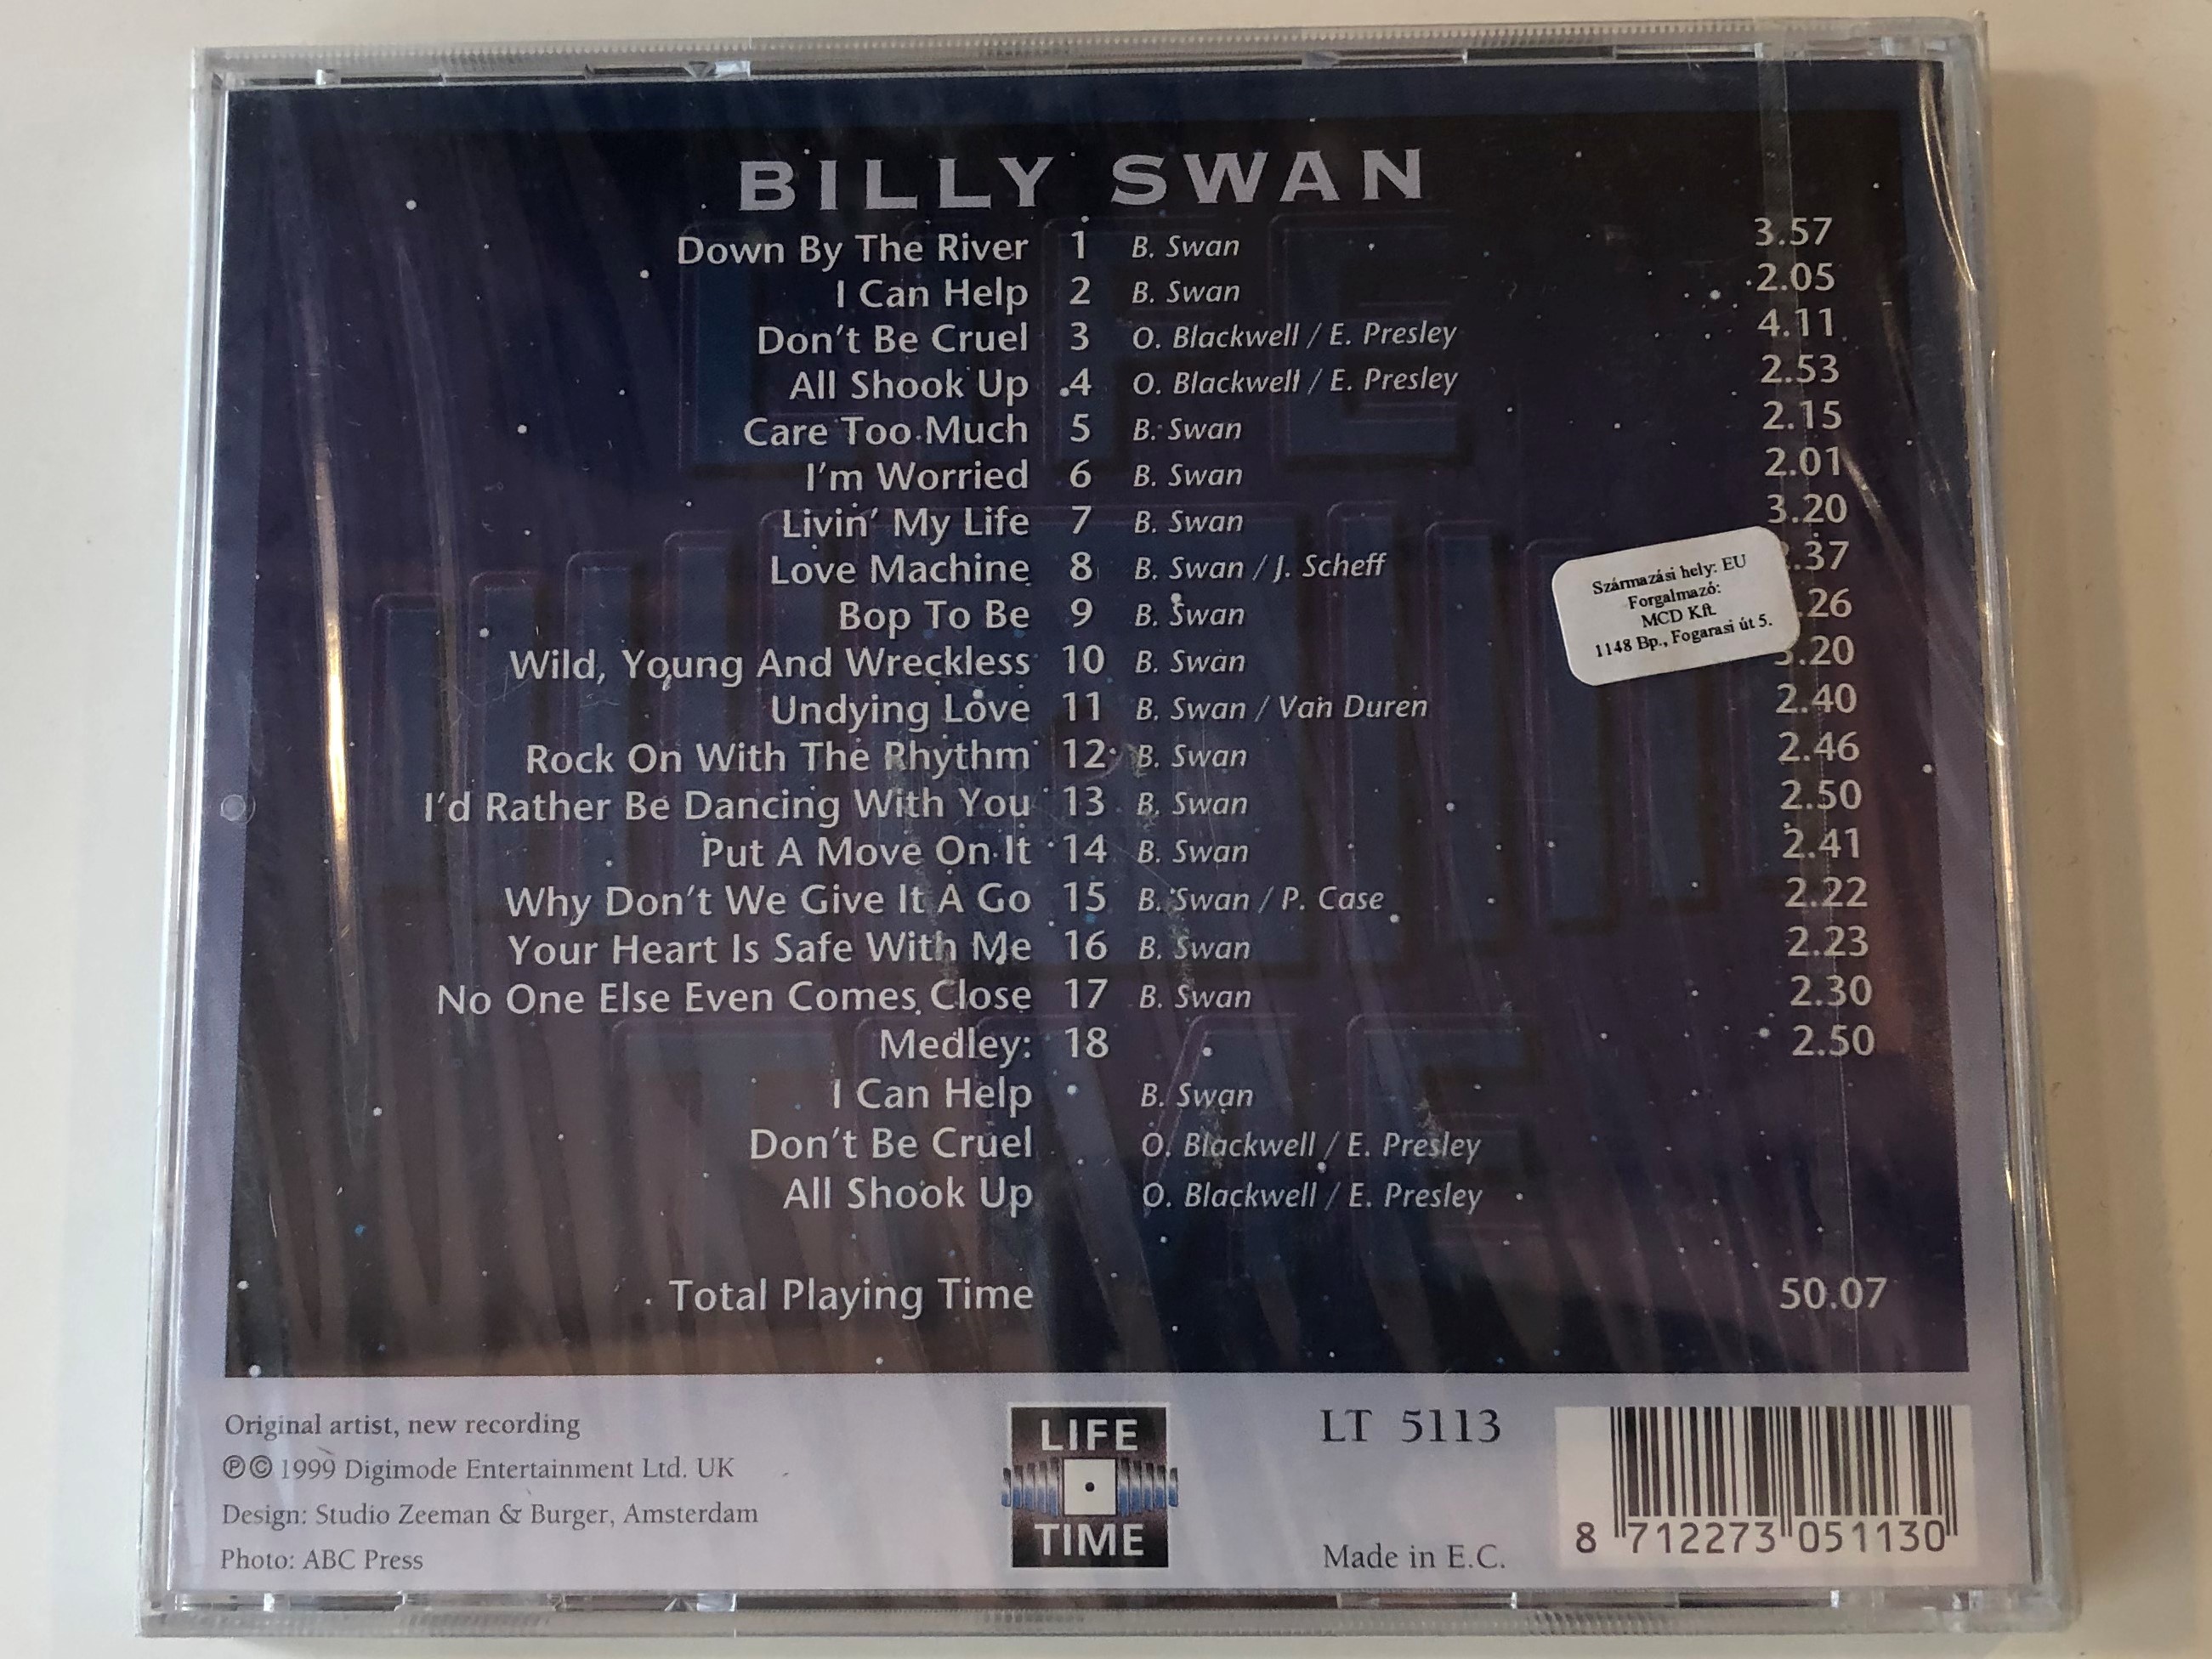 billy-swan-i-can-help-down-by-the-river-all-shook-up-care-too-much-wild-young-and-wreckless-don-t-be-cruel-digimode-entertainment-ltd.-audio-cd-1999-lt-5113-2-.jpg